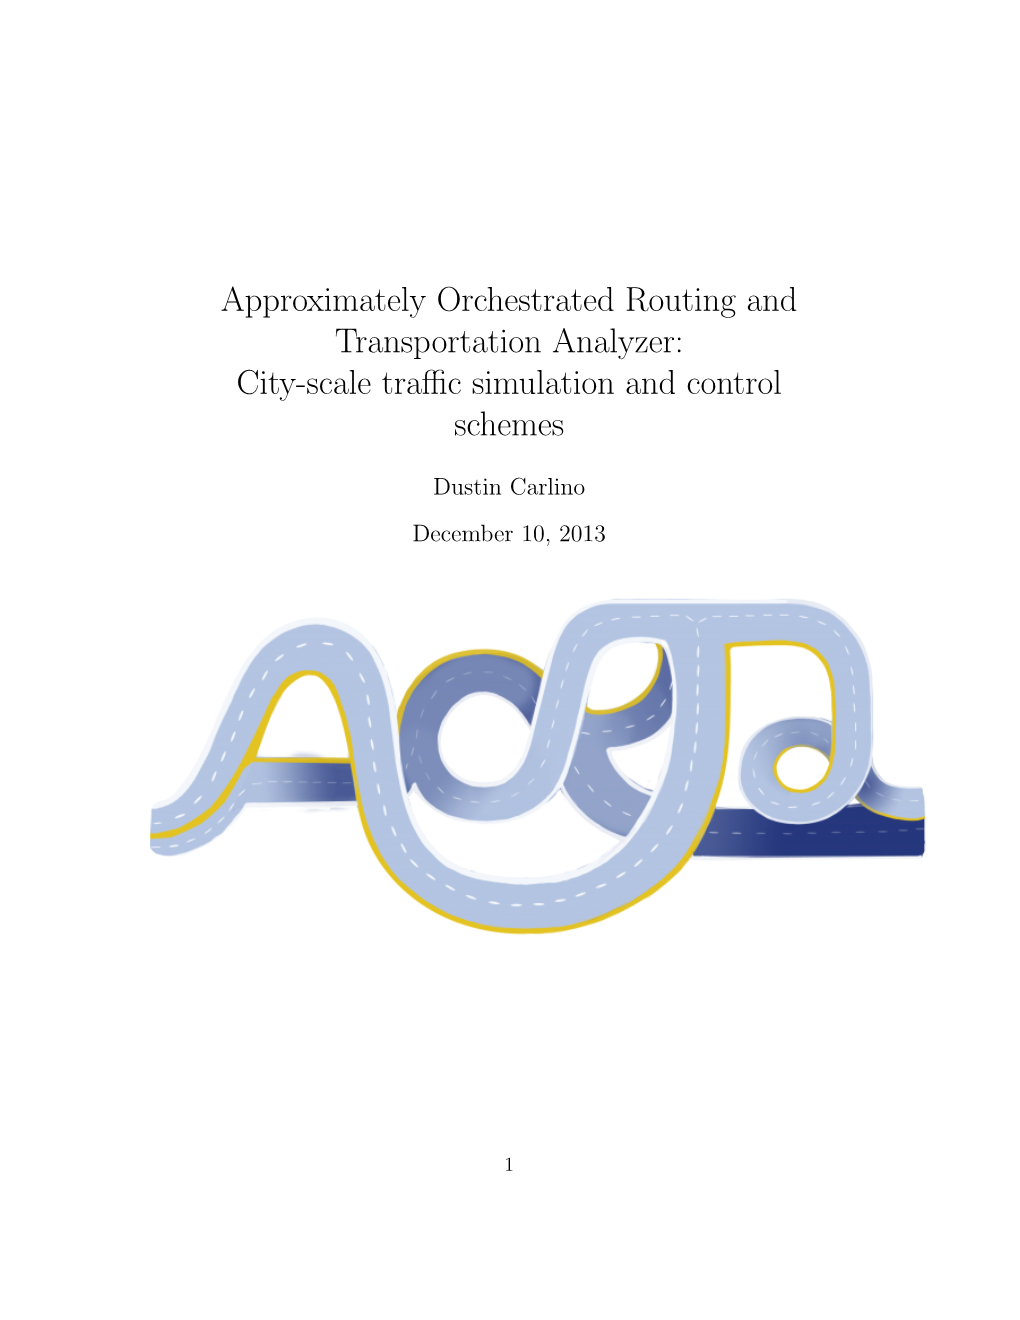 Approximately Orchestrated Routing and Transportation Analyzer: City-Scale Traﬃc Simulation and Control Schemes